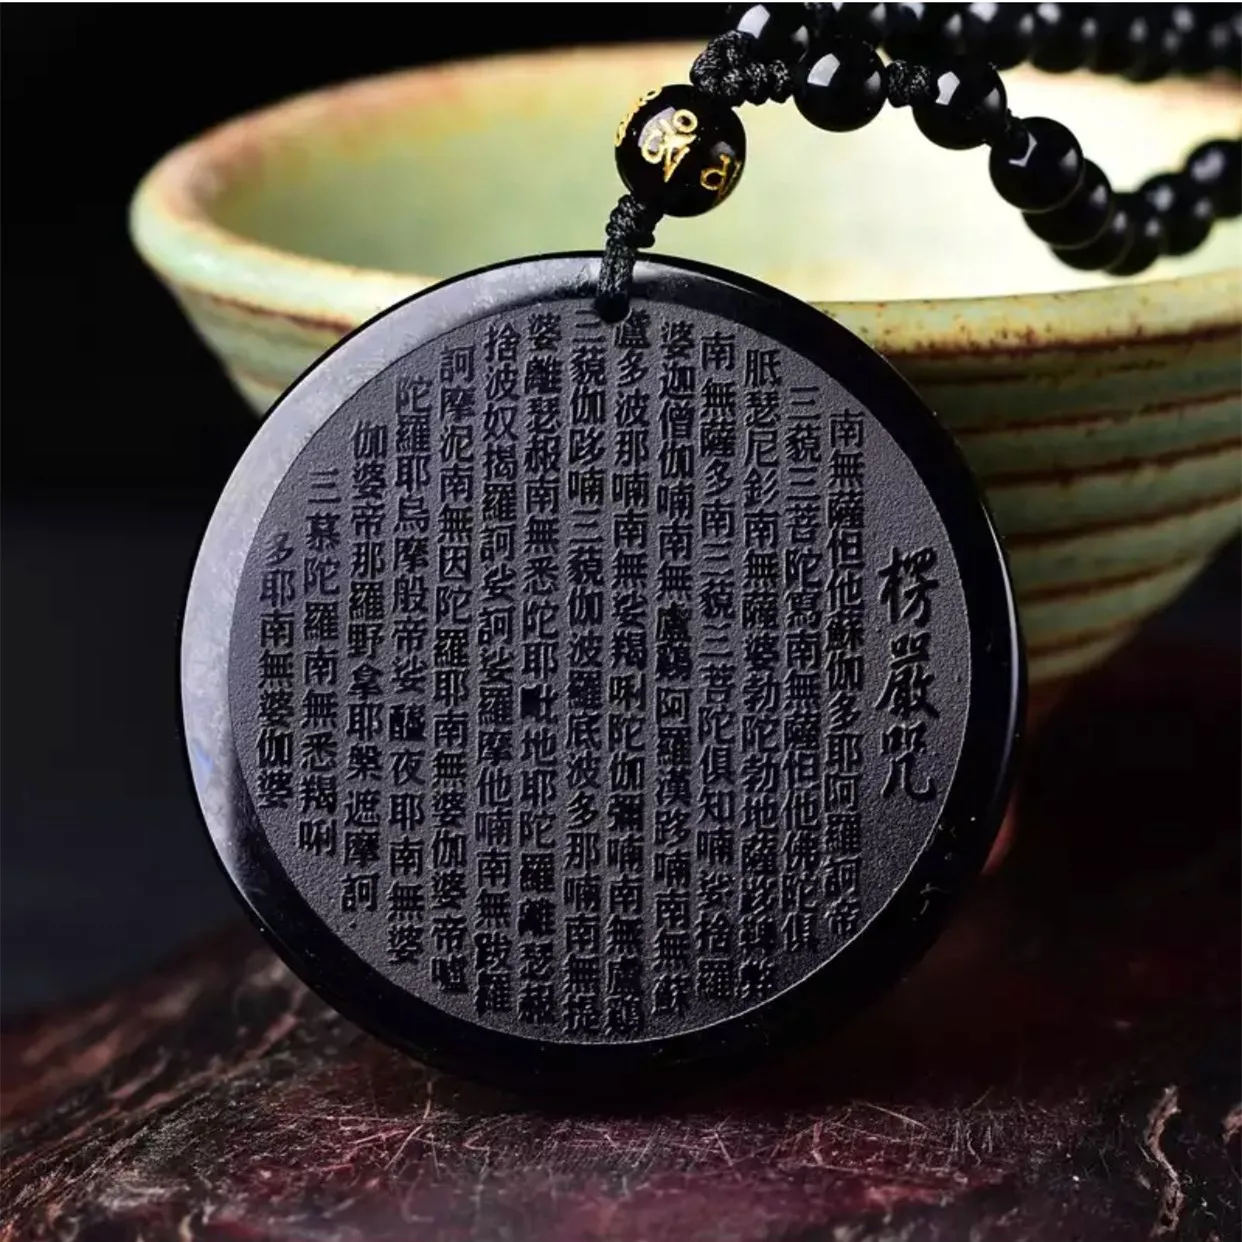 Natural Black Ice Obsidian Handwork Chinese Buddhism Words Heart Sutra Hollow Pendant + Black Beads Necklace Fine Charm Jewelry